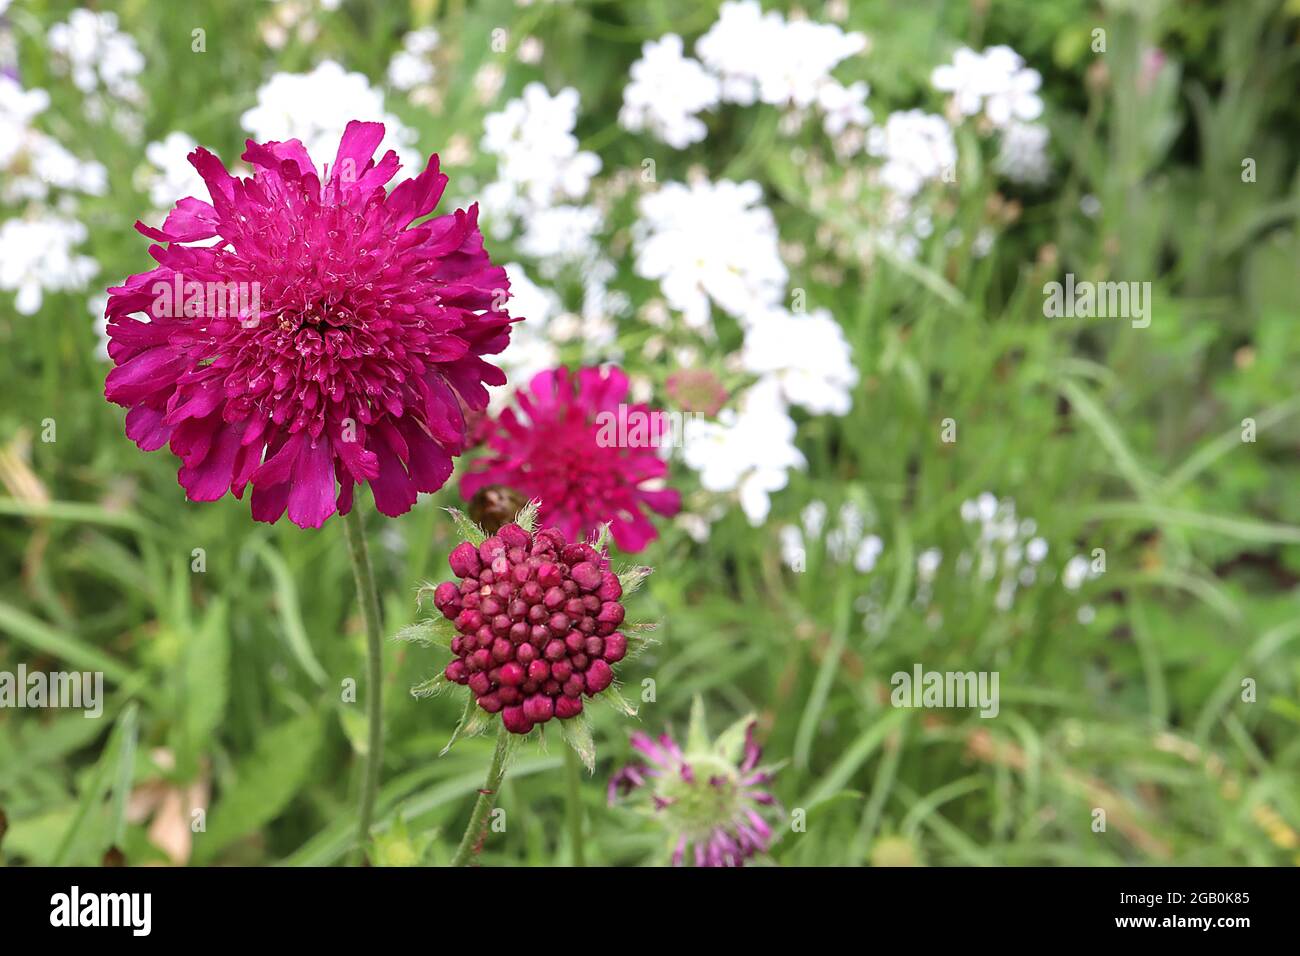 Knautia macedonica 'Red Knight' Macedonian scabious Red Knight – crimson red flowers with pincushion centre of ray florets, June, England, UK Stock Photo Alamy